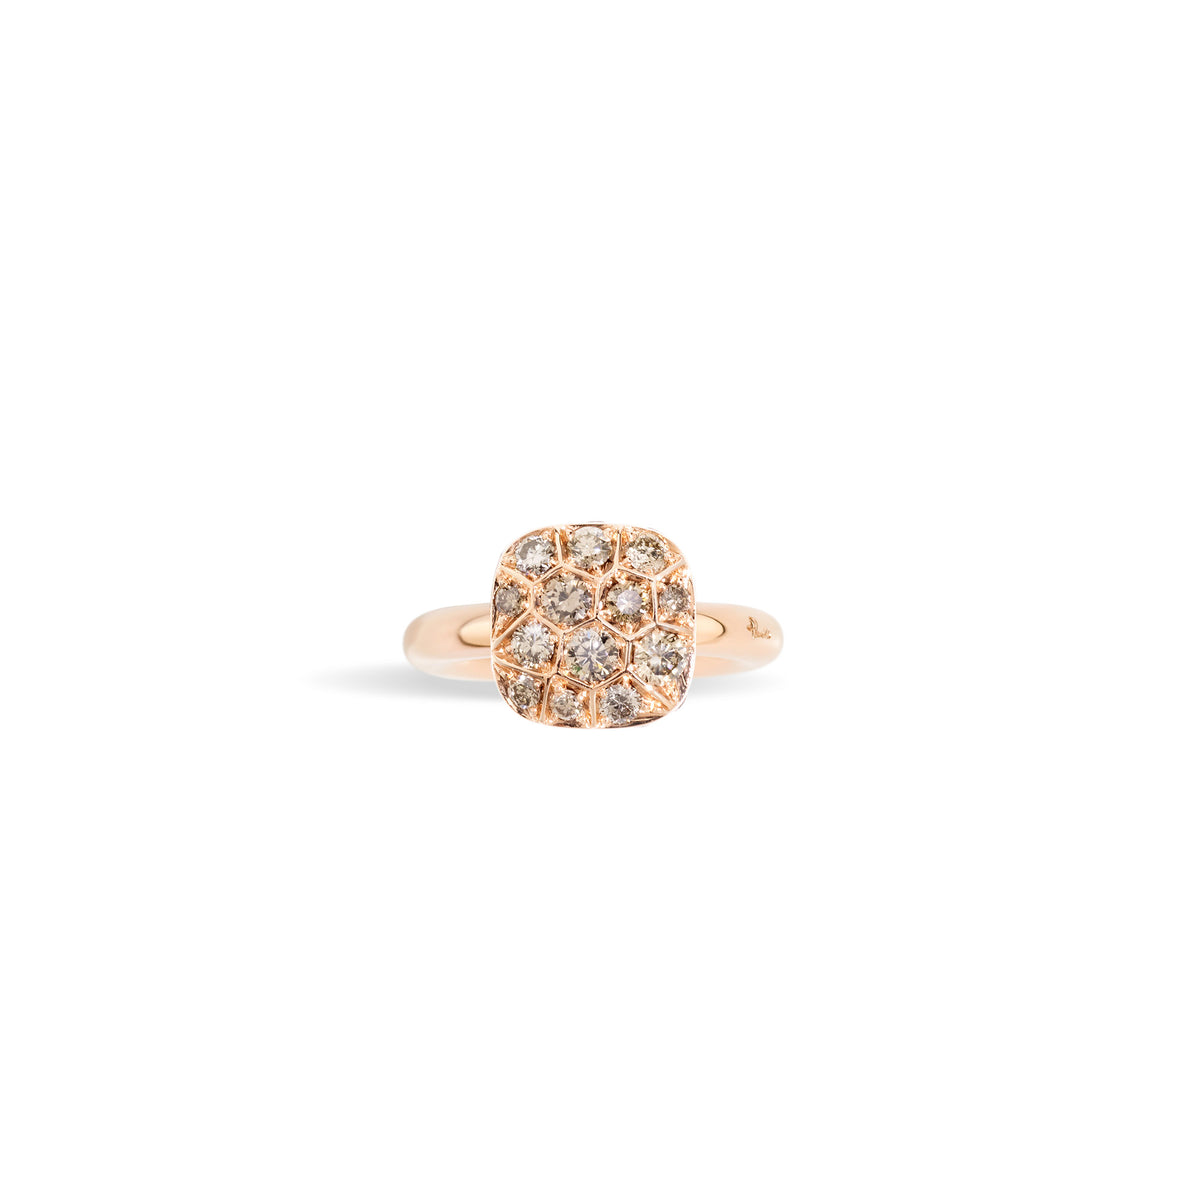 Nudo Maxi Ring in 18k Rose Gold and White Gold with Brown Diamonds - Orsini Jewellers NZ